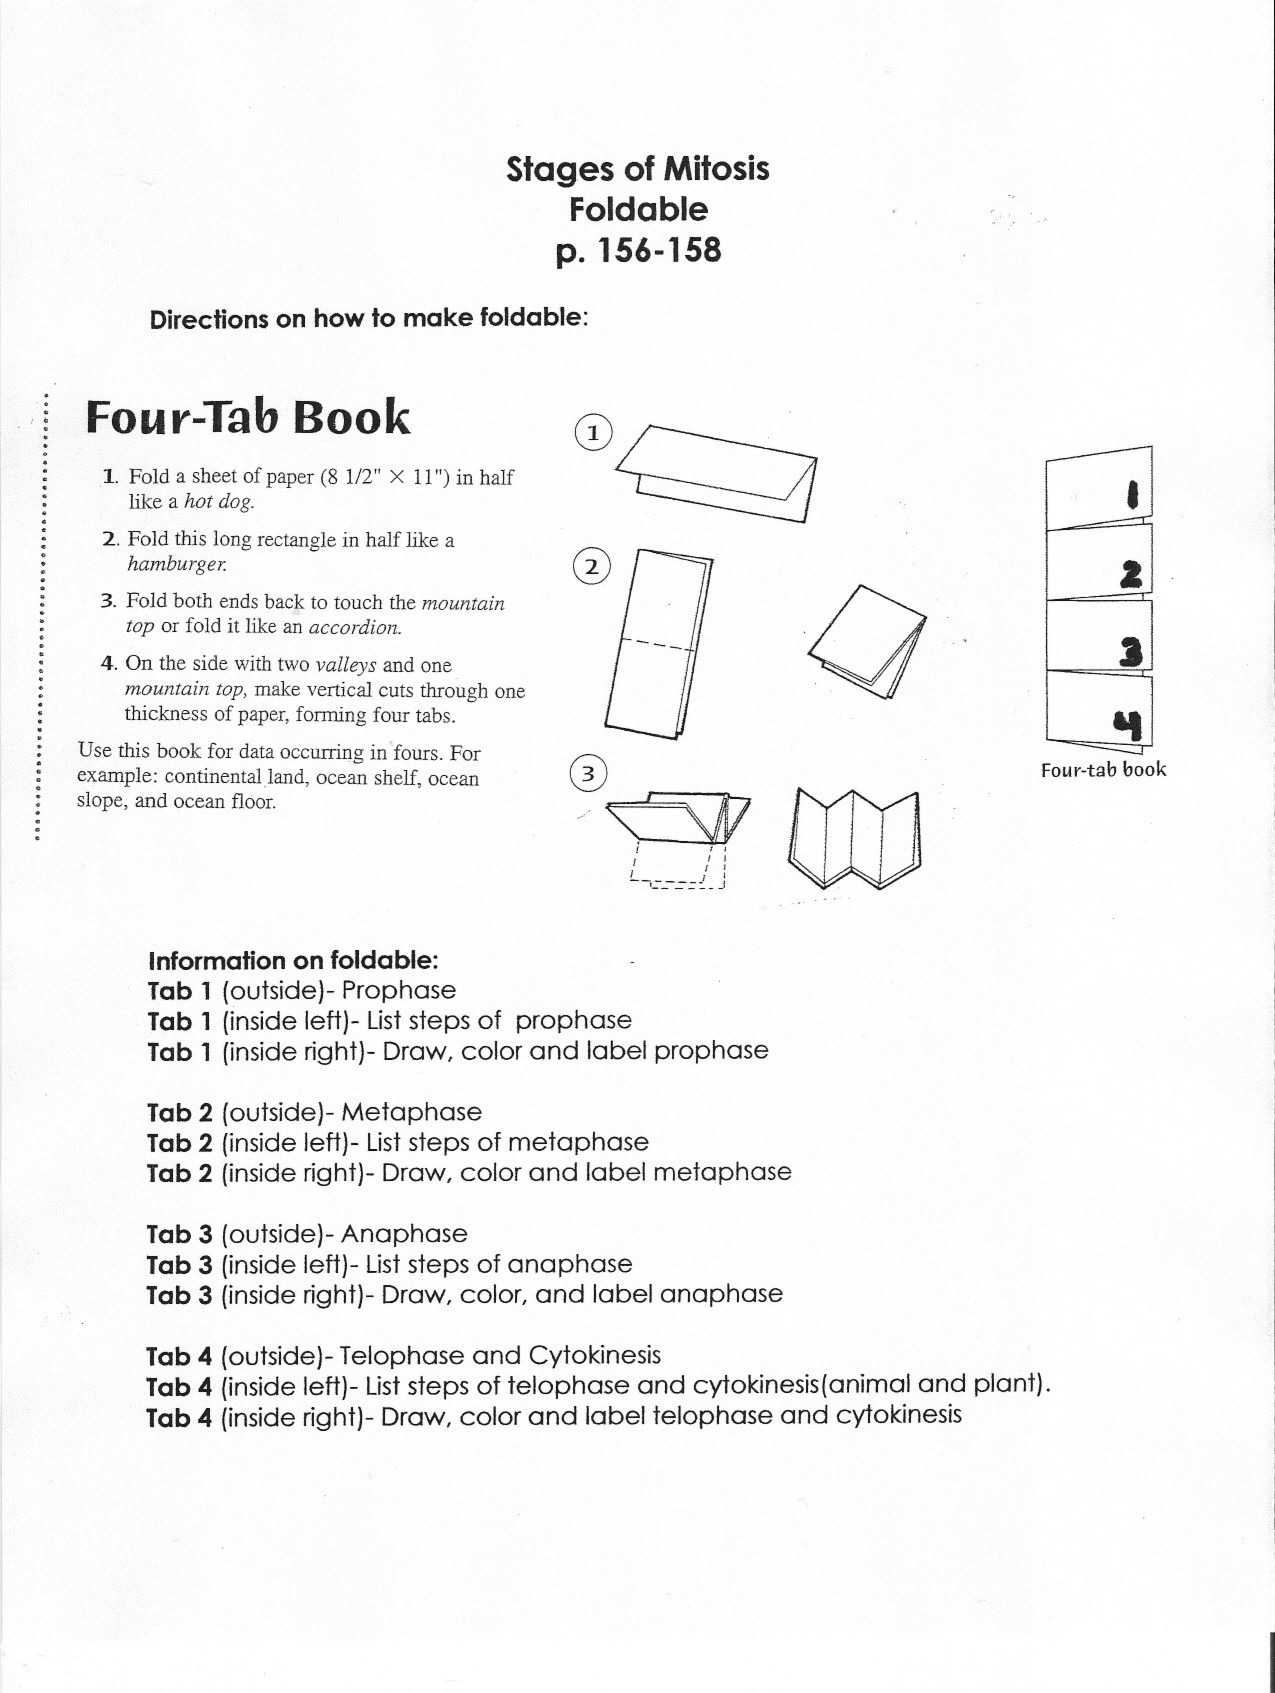 Free Math Worksheets Third Grade 3 Subtraction Subtract 1 Digit From 2 Digit Missing Number